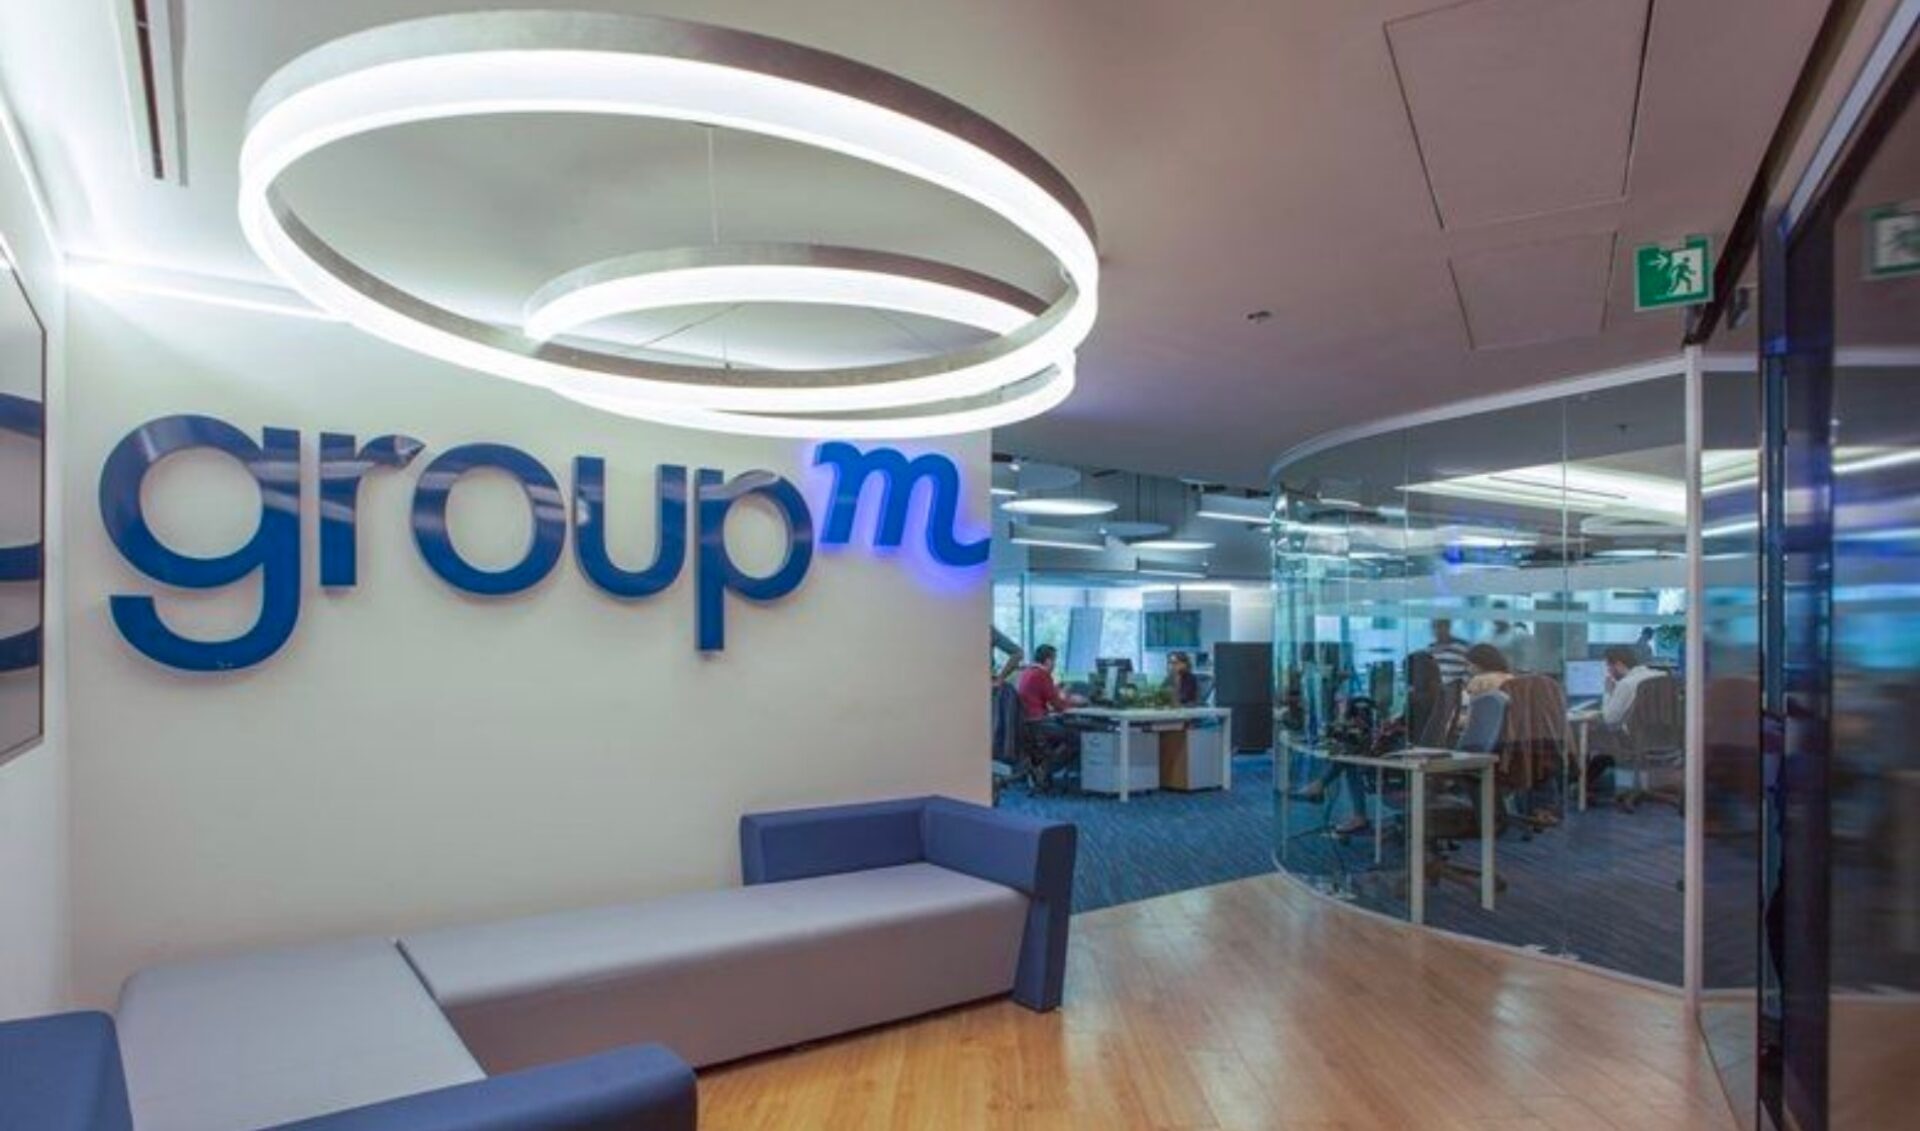 GroupM forms coalition with Disney, YouTube, Roku, NBCUniversal to standardize streaming ads